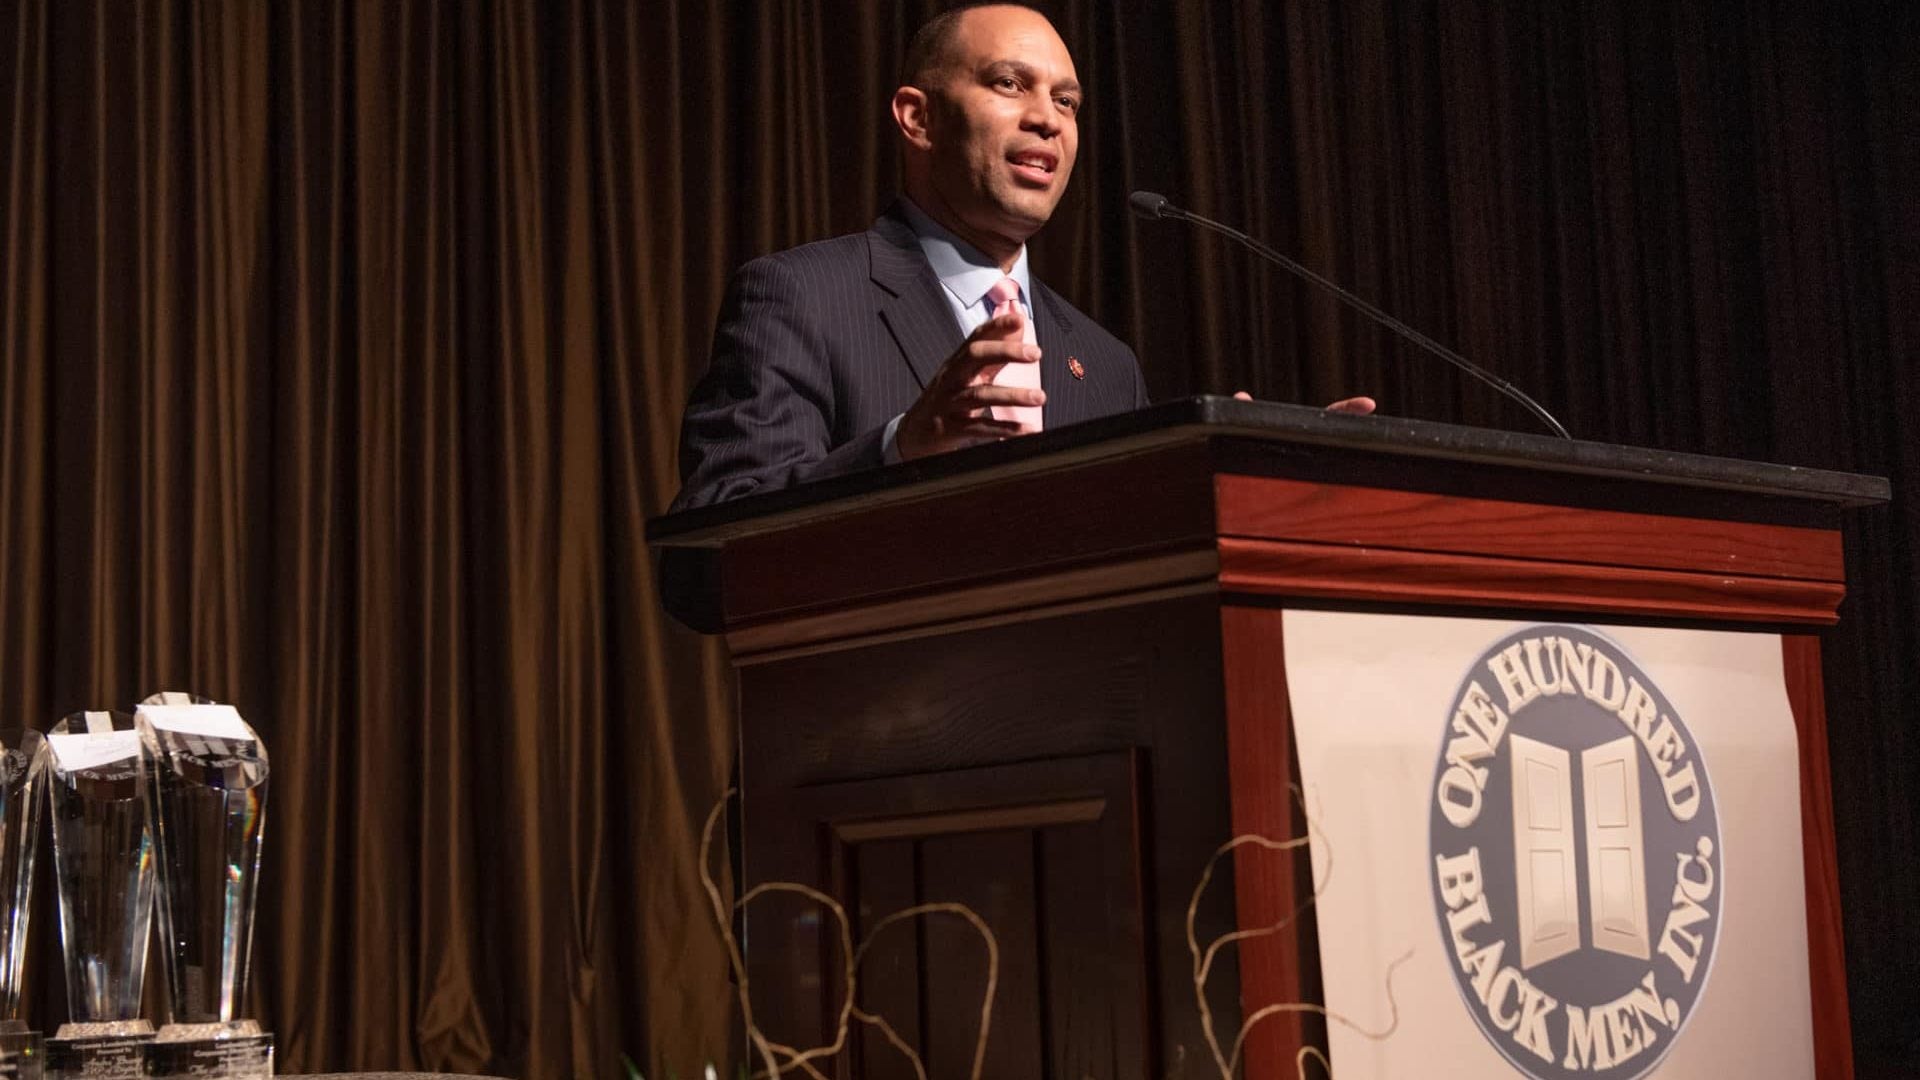 From Hip Hop’s Streets To The House Floor: Congressman Hakeem Jeffries Is Bringing It The Brooklyn Way